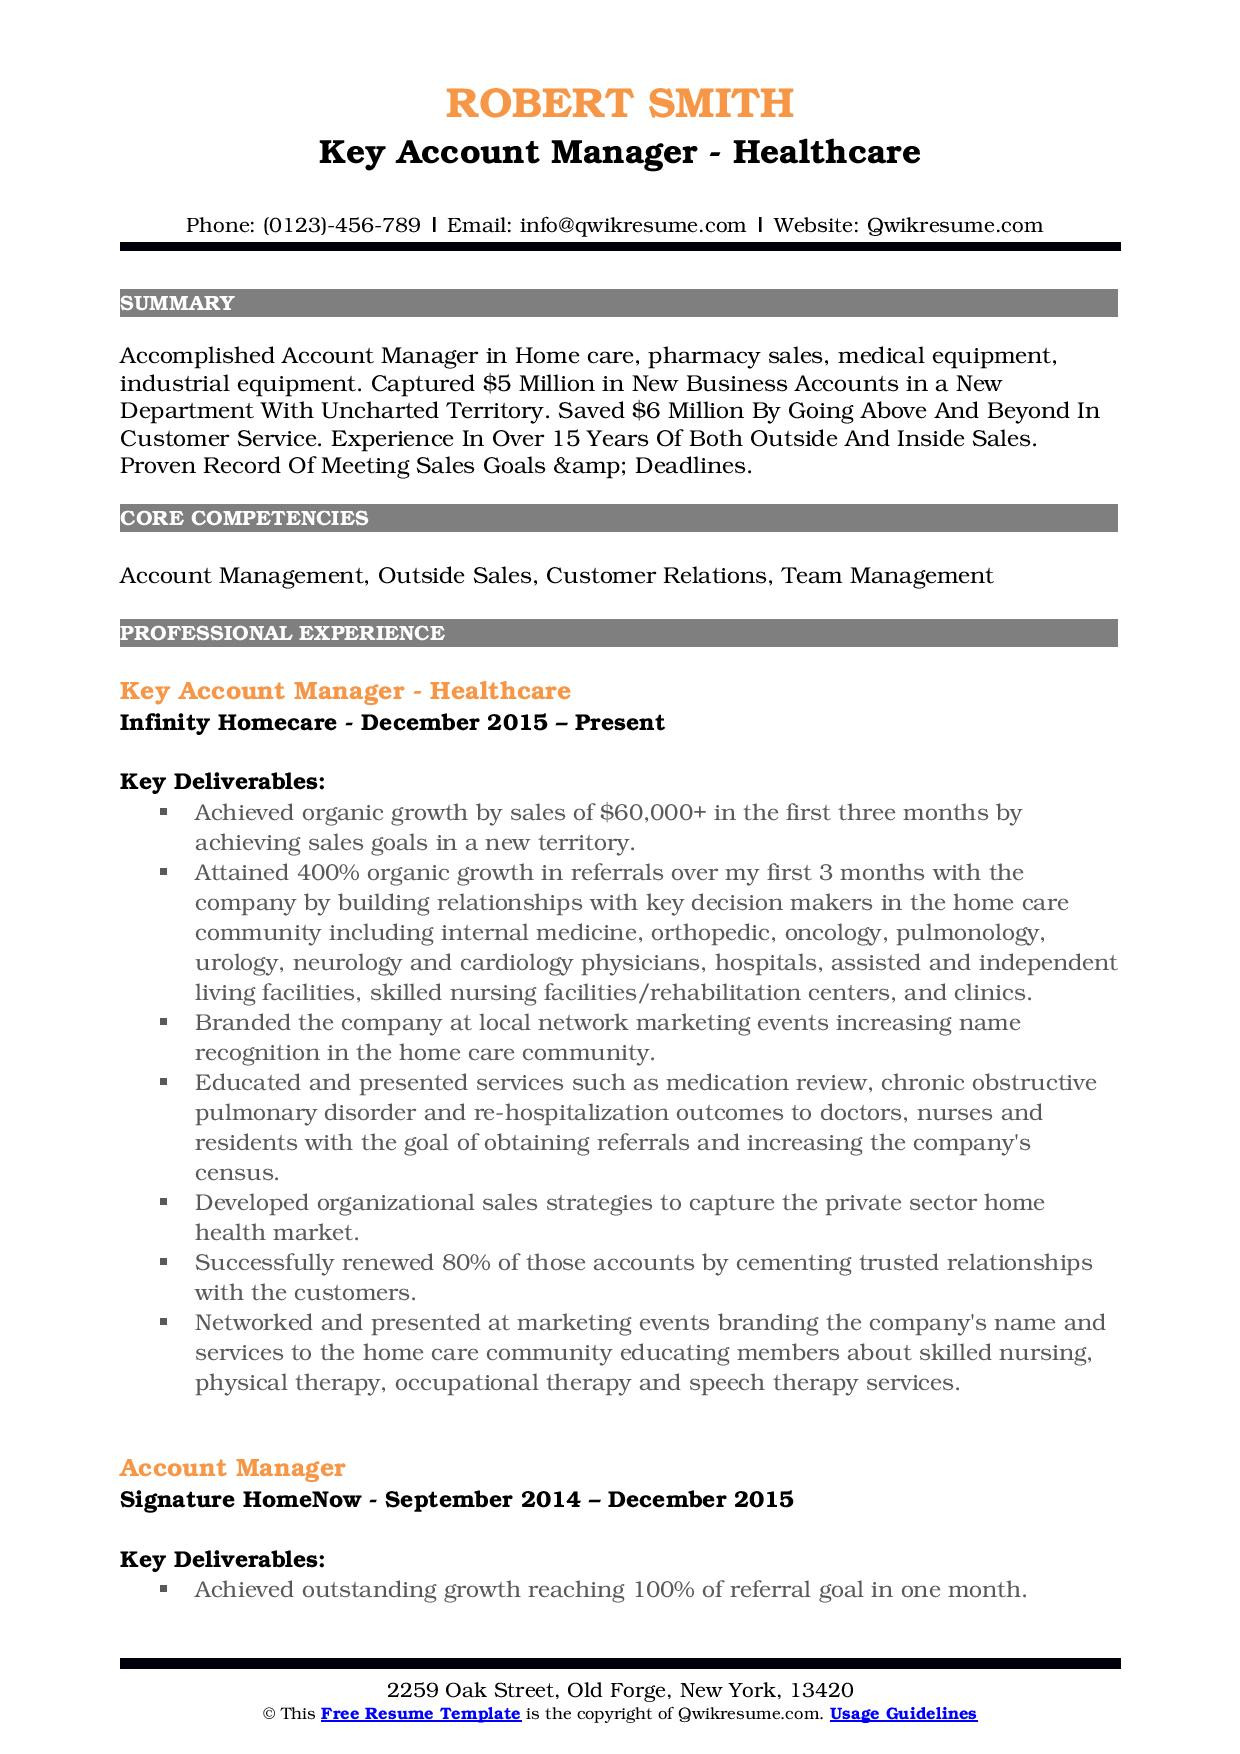 Sample Resume for Account Executive Meeting with Customers Looking for A Great Account Manager Resume? Here You are!